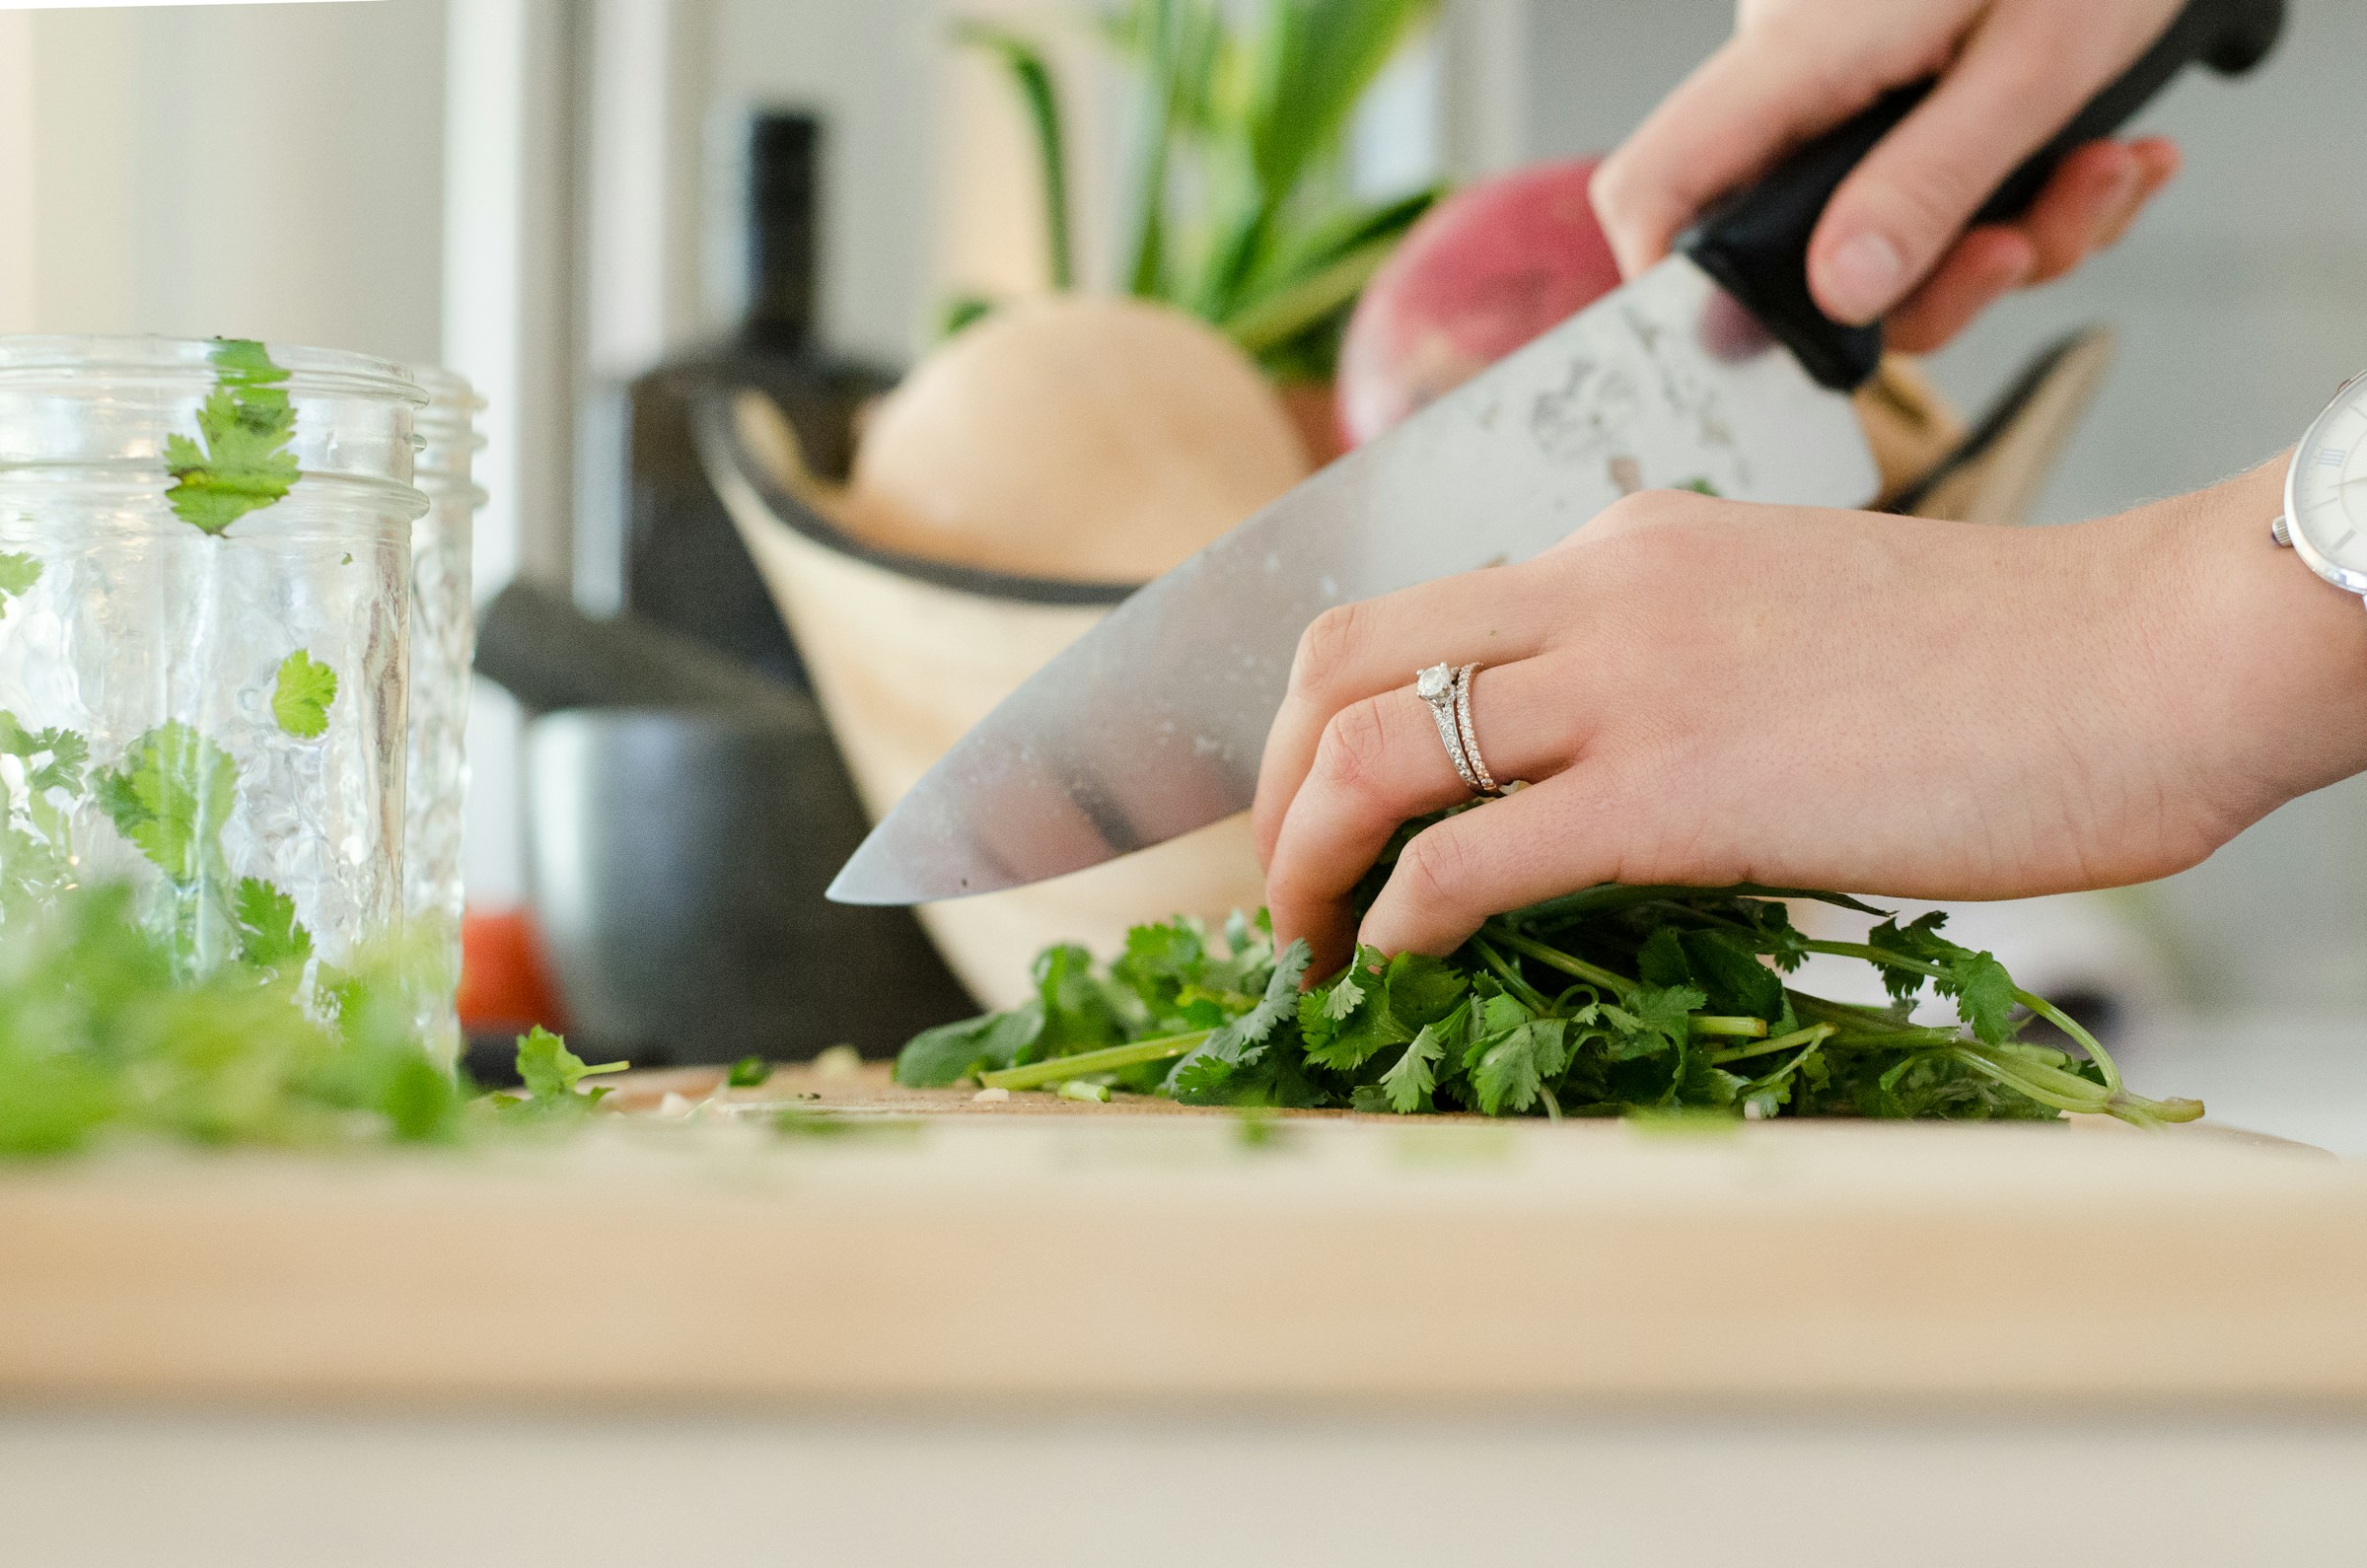 A person chopping vegetables | Source: Unsplash